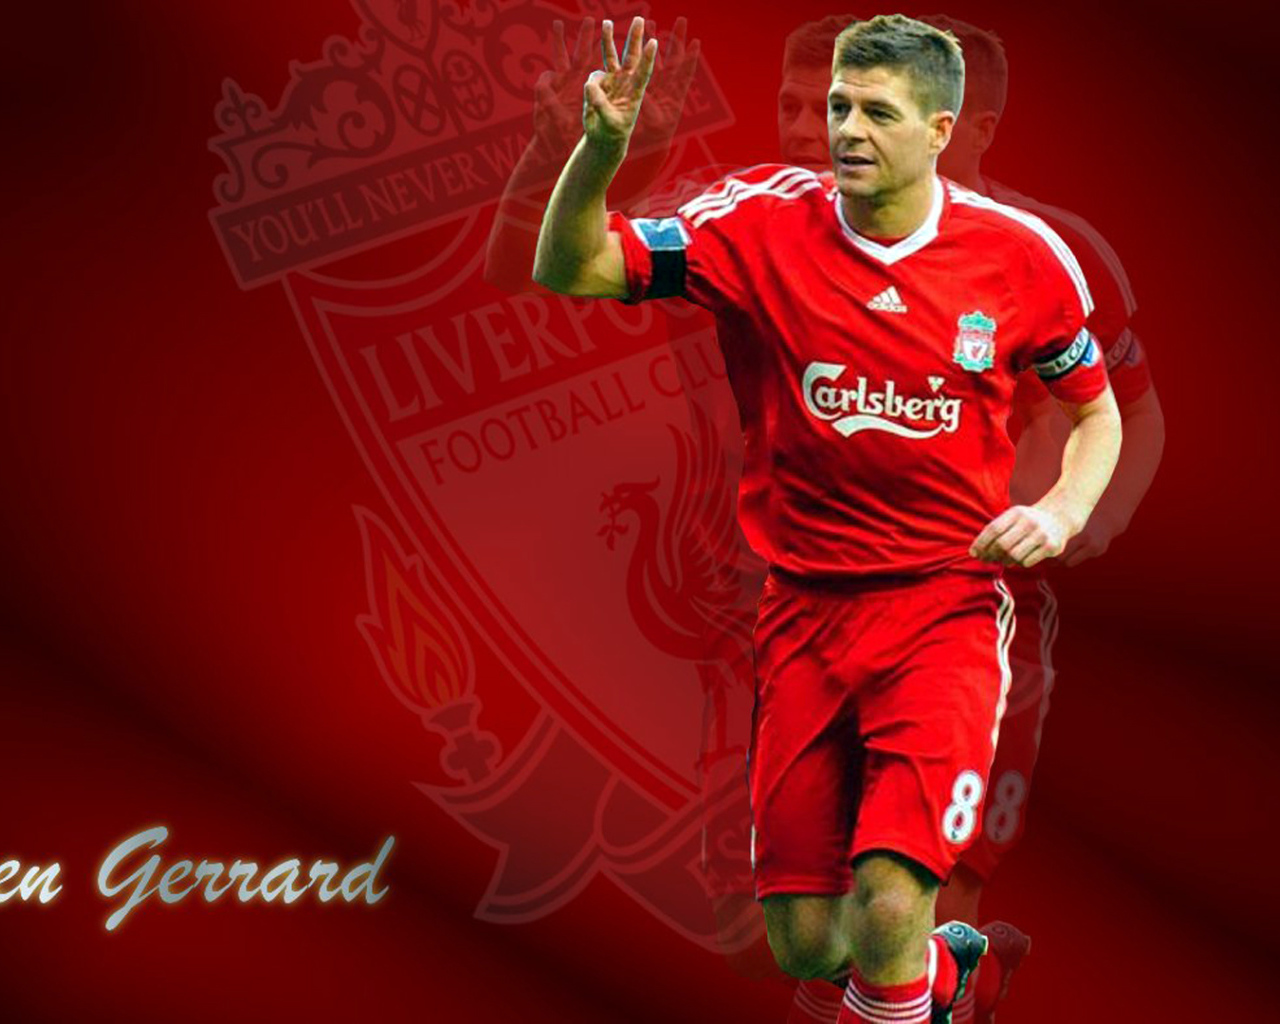 The halfback of Liverpool Steven